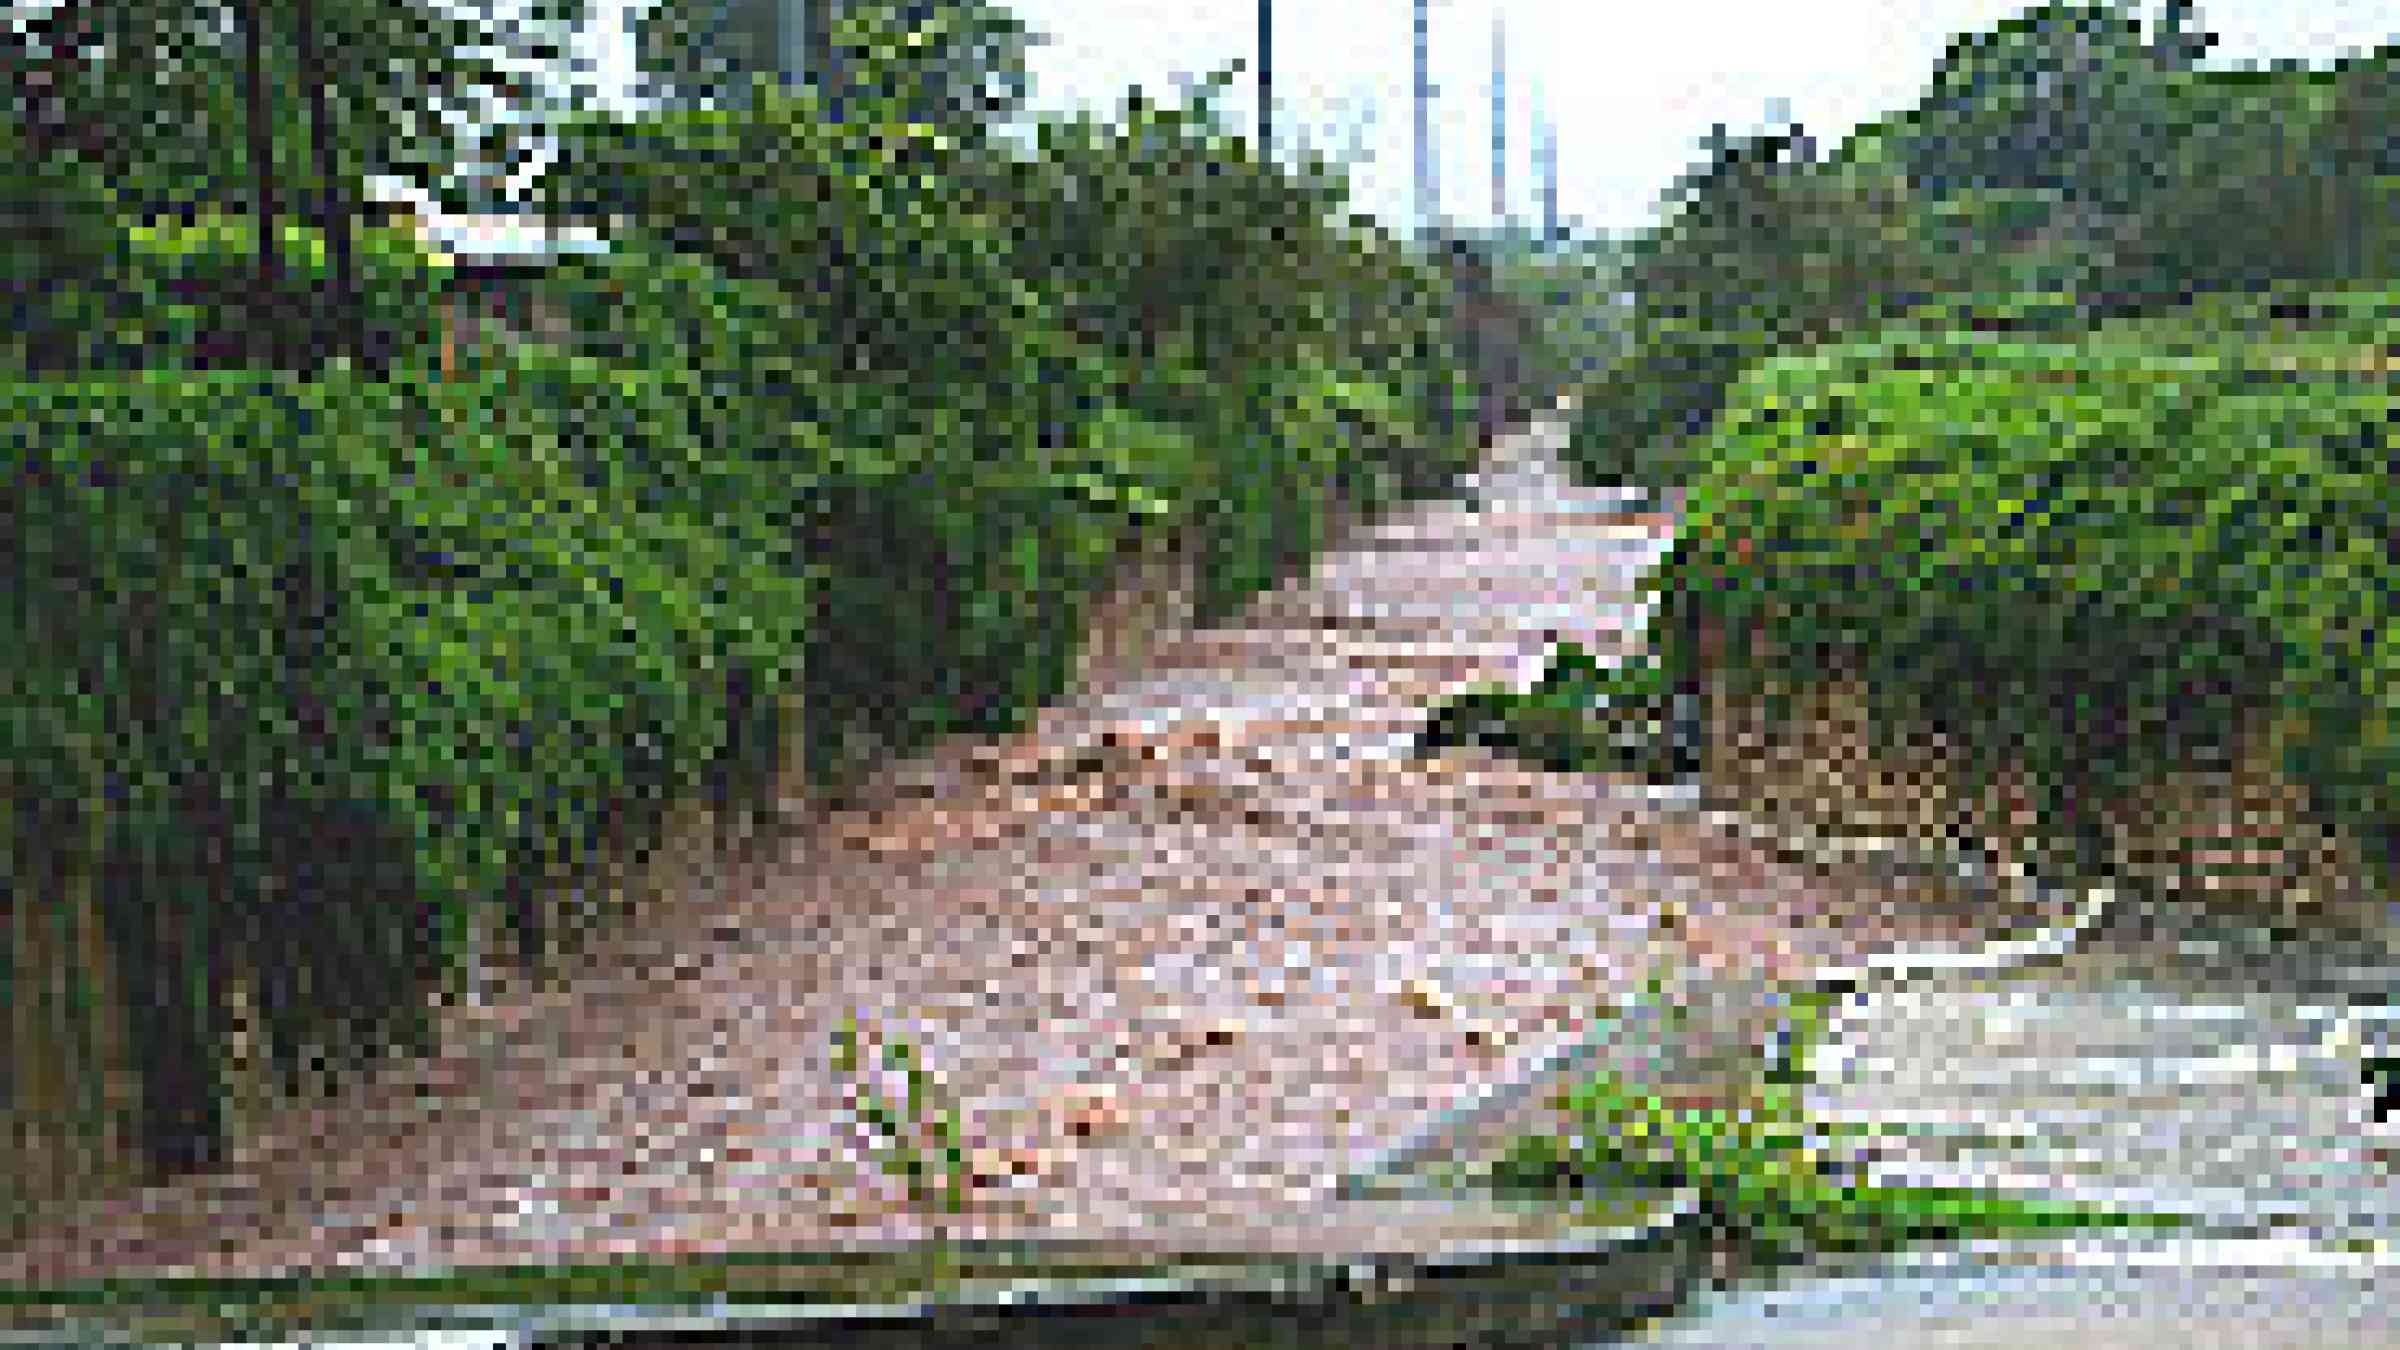 Photo of floods in Jamaica by Flickr user, Chrysaora, Creative Commons Attribution 2.0 Generic (CC BY 2.0)